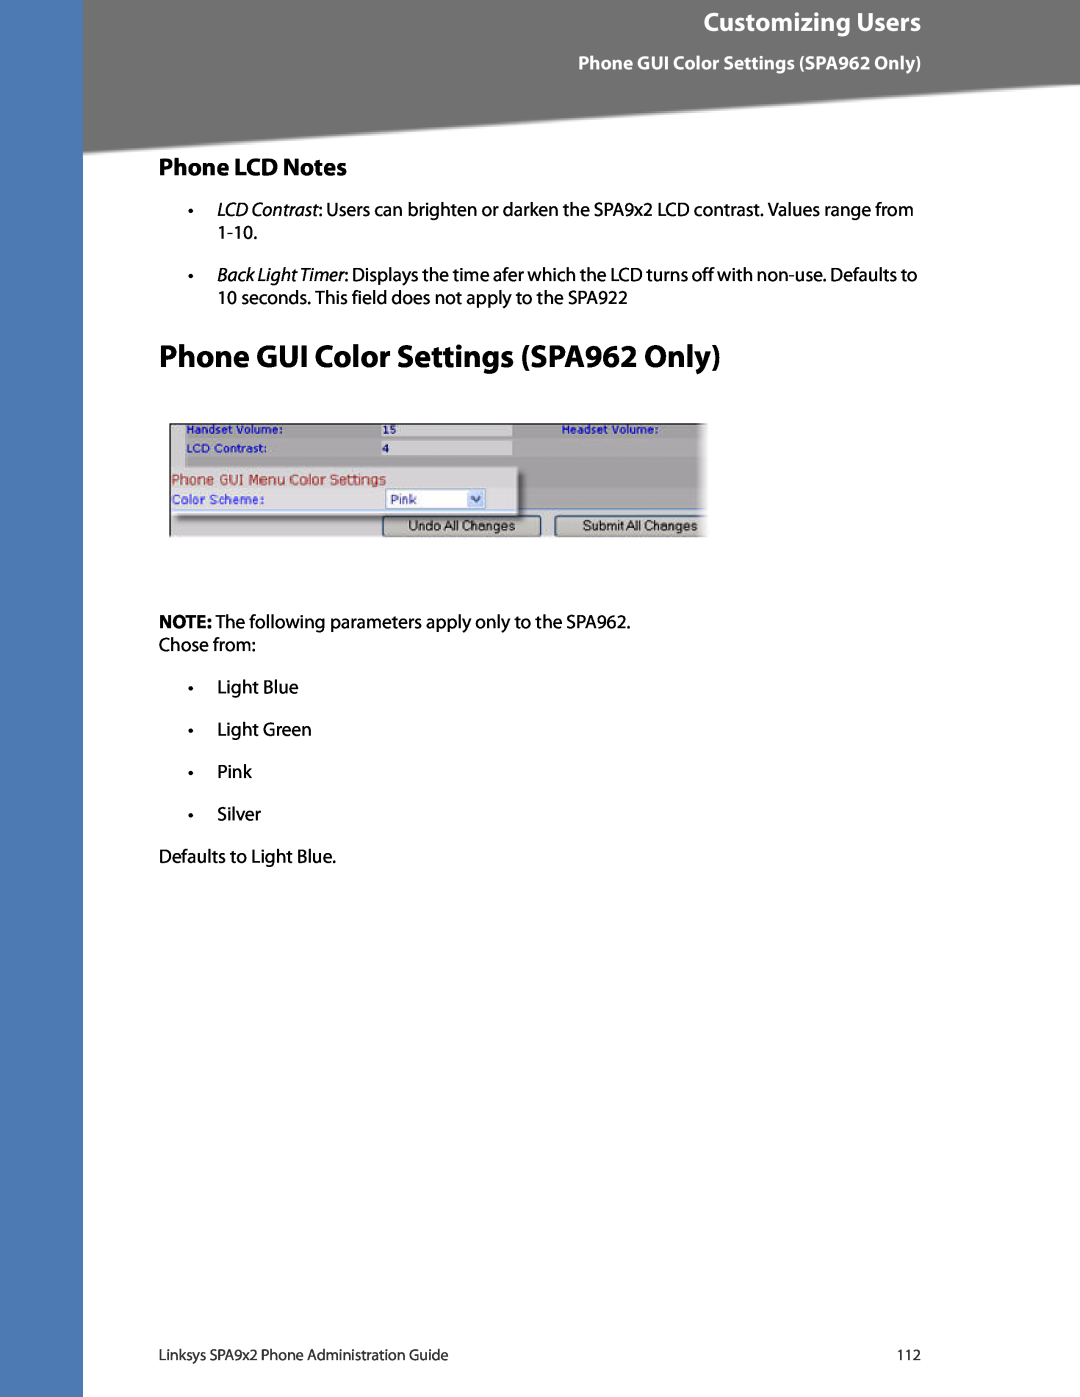 Linksys SPA922, SPA942, SPA932 manual Phone GUI Color Settings SPA962 Only, Phone LCD Notes, Customizing Users 